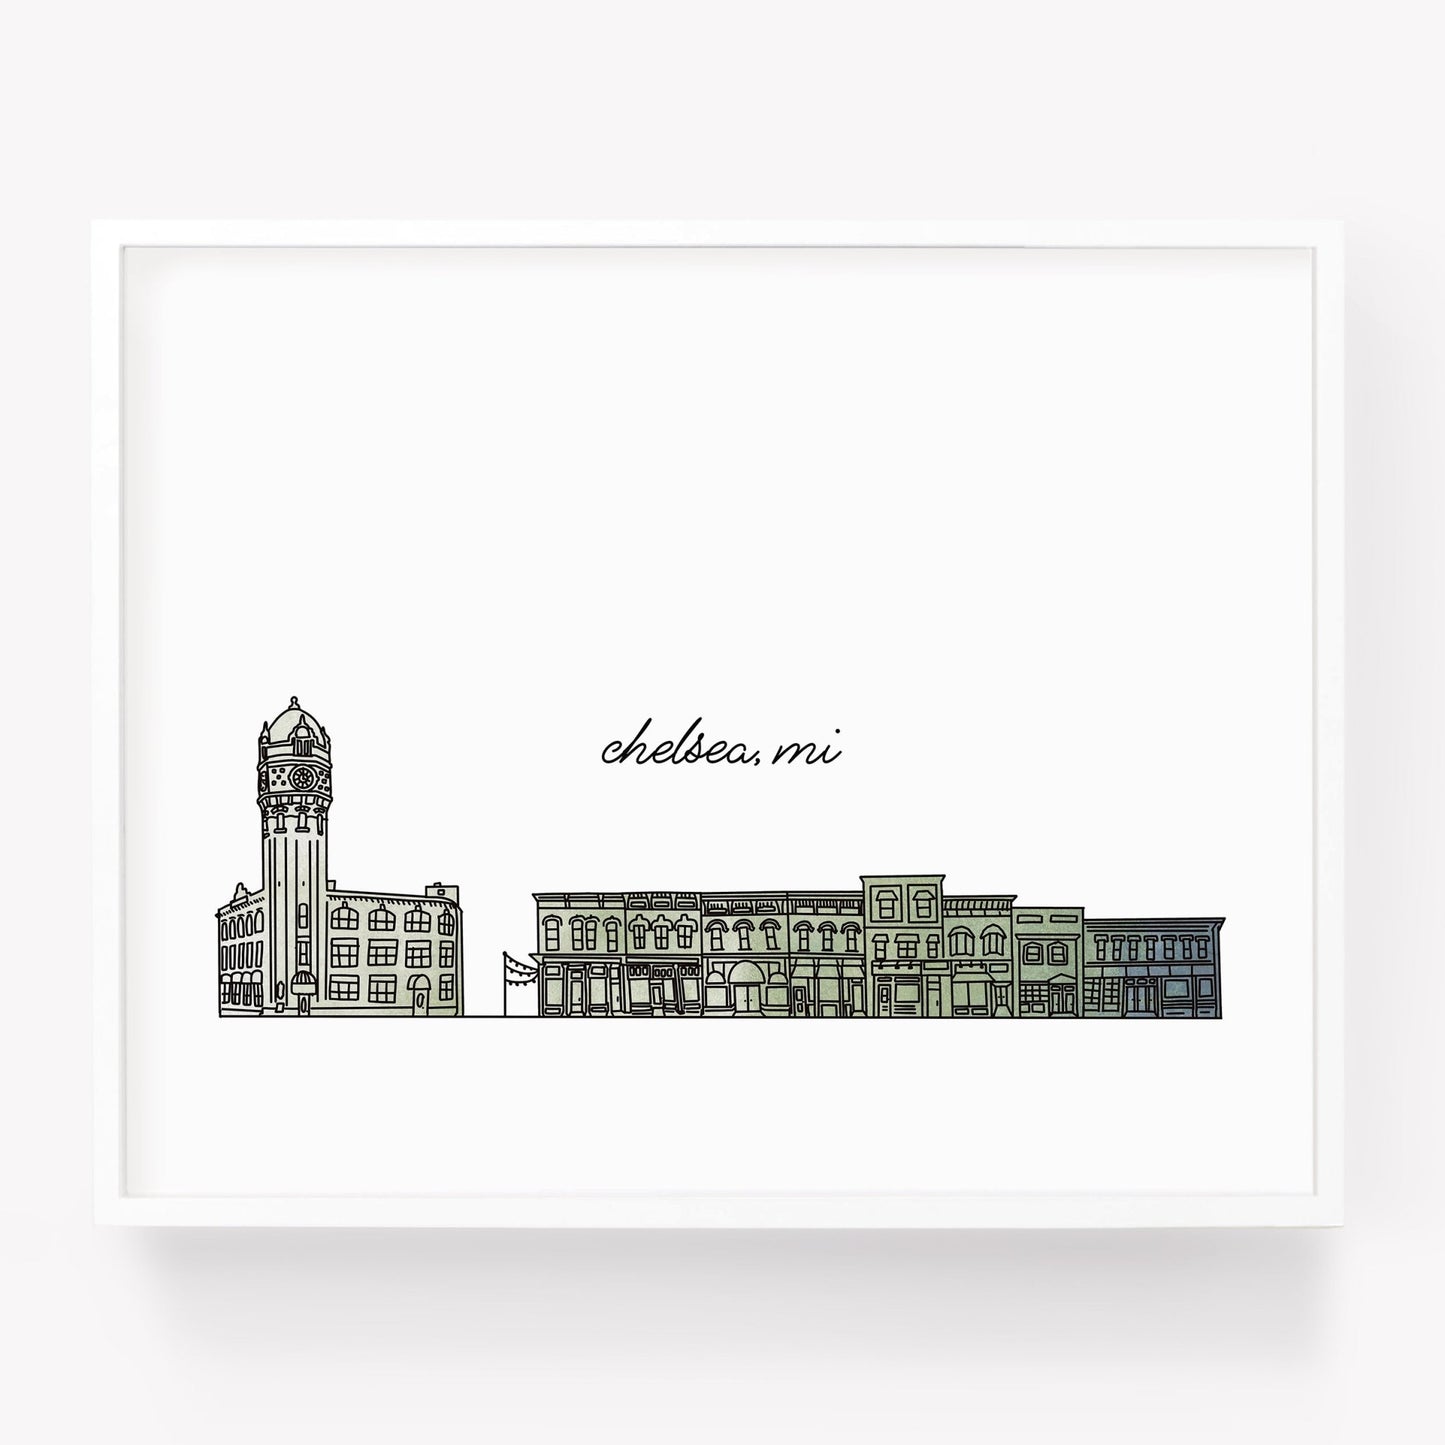 A city art print of a skyline drawing of Chelsea Michigan - Sparks House Co